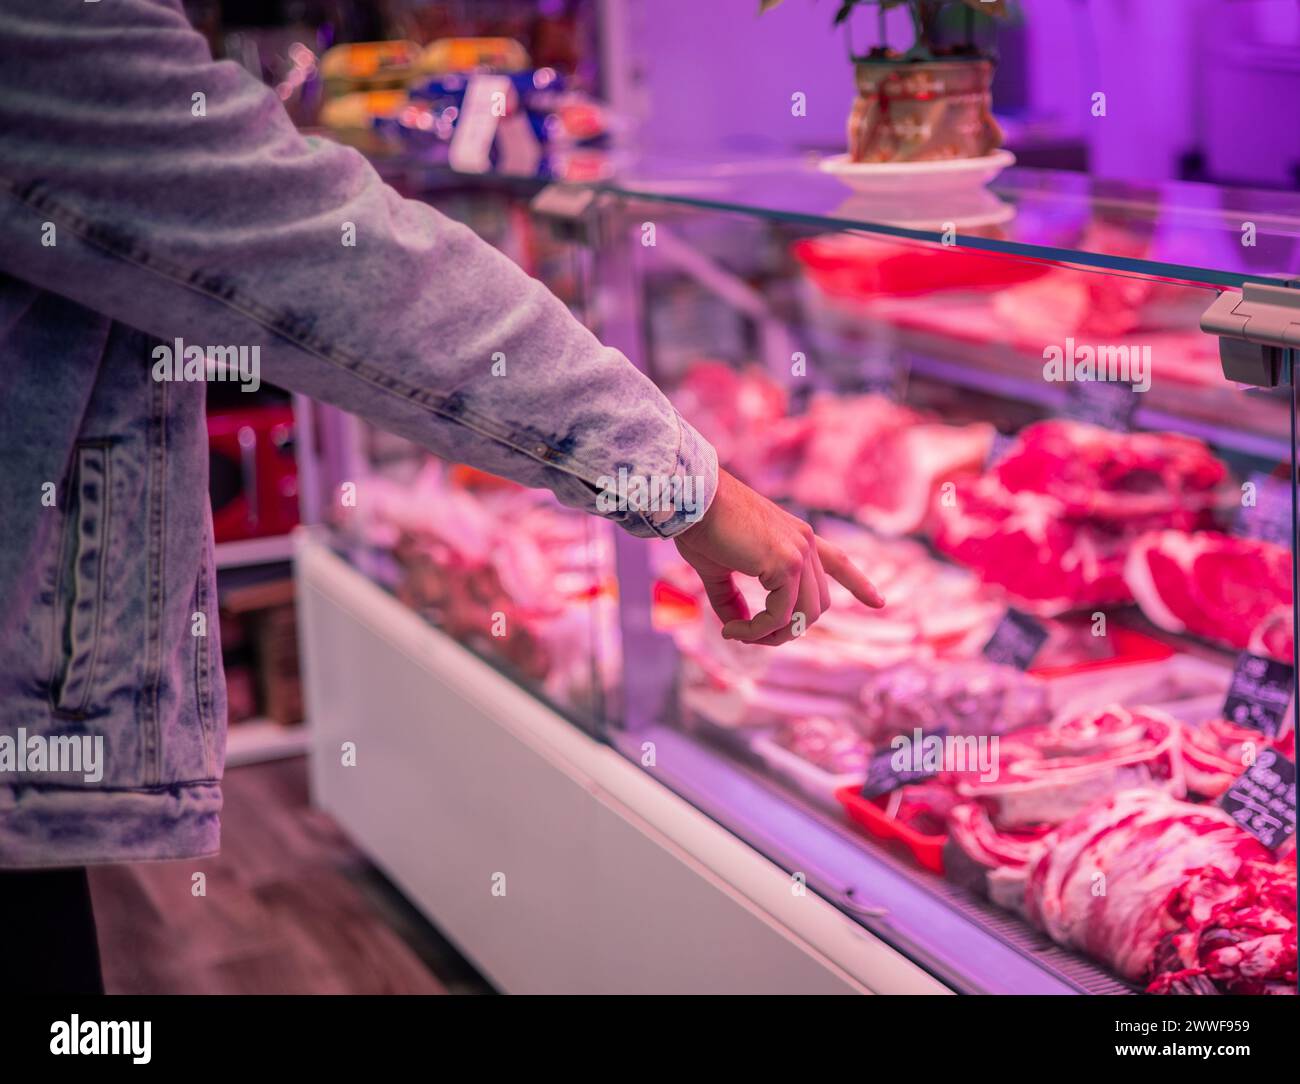 In this image, a customer is pointing with their finger at the products displayed on the counter of a butcher shop. Their hand and arm are in closeup, Stock Photo